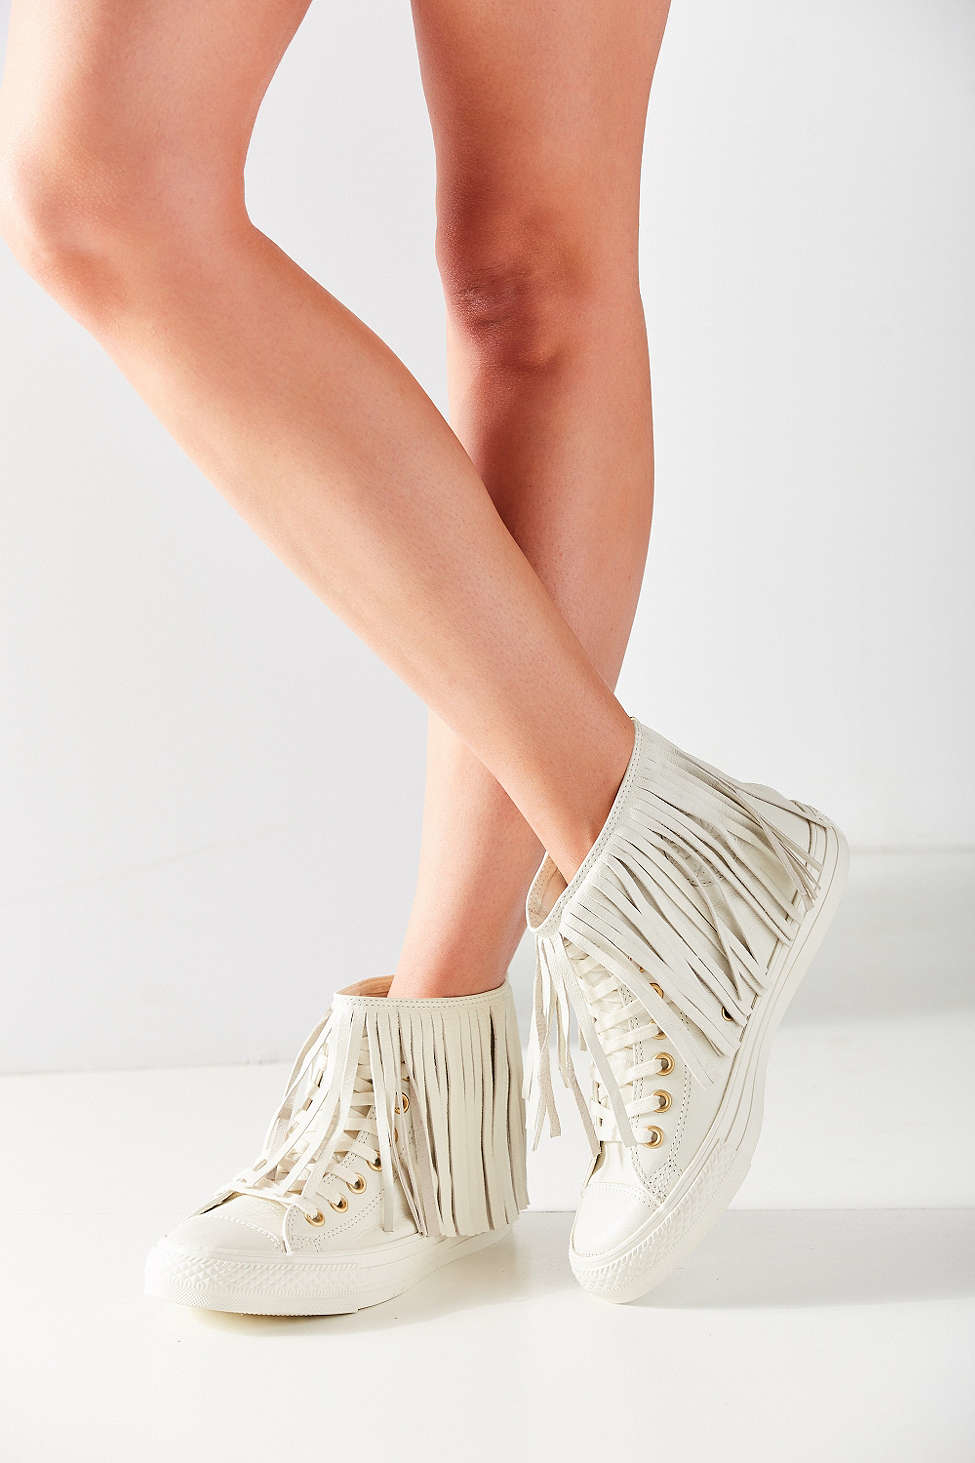 Converse Leather Chuck Taylor All Star Fringe Sneaker in White (Natural) -  Lyst